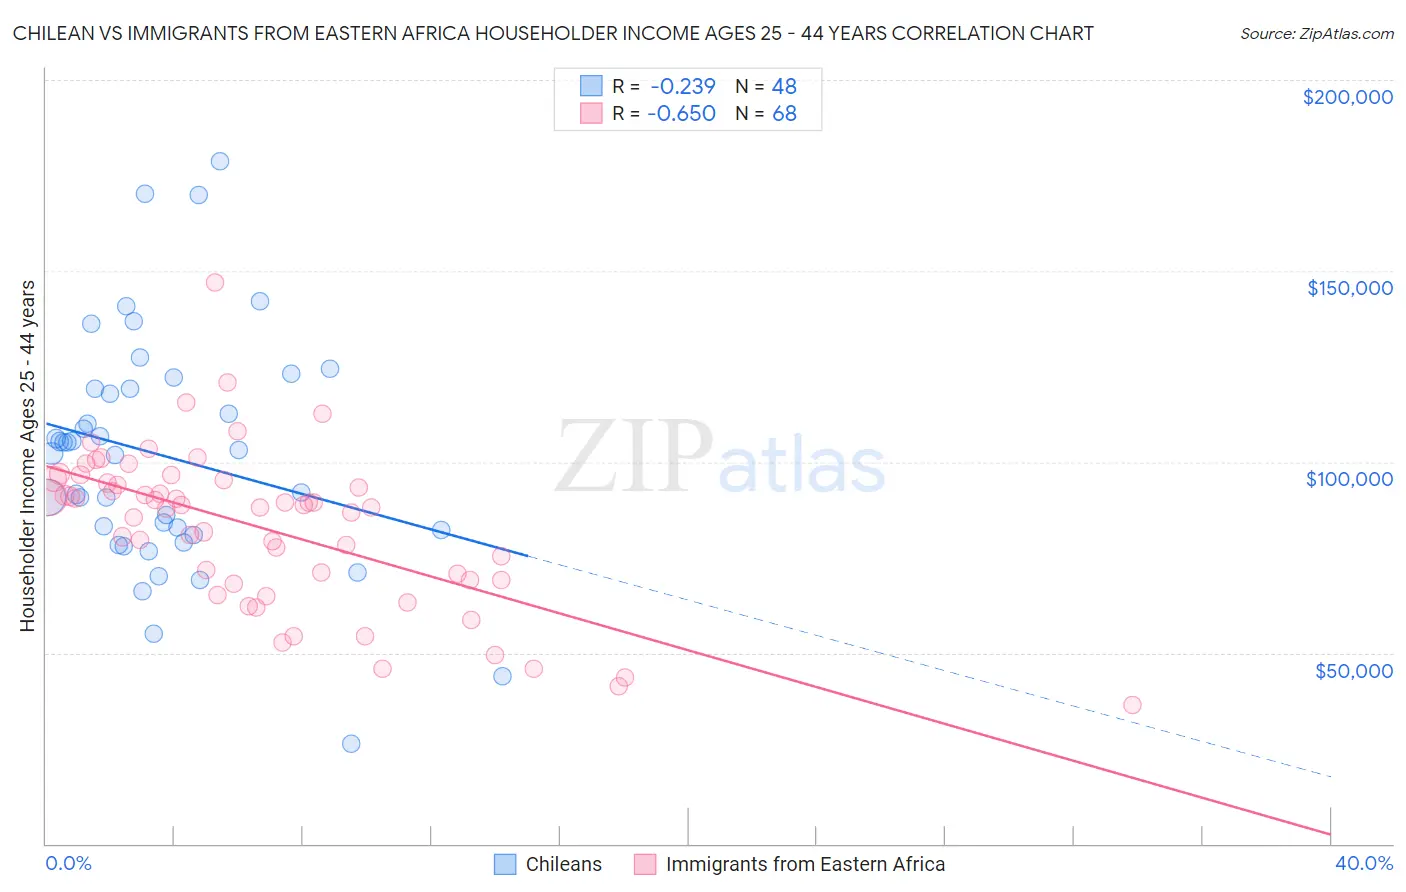 Chilean vs Immigrants from Eastern Africa Householder Income Ages 25 - 44 years